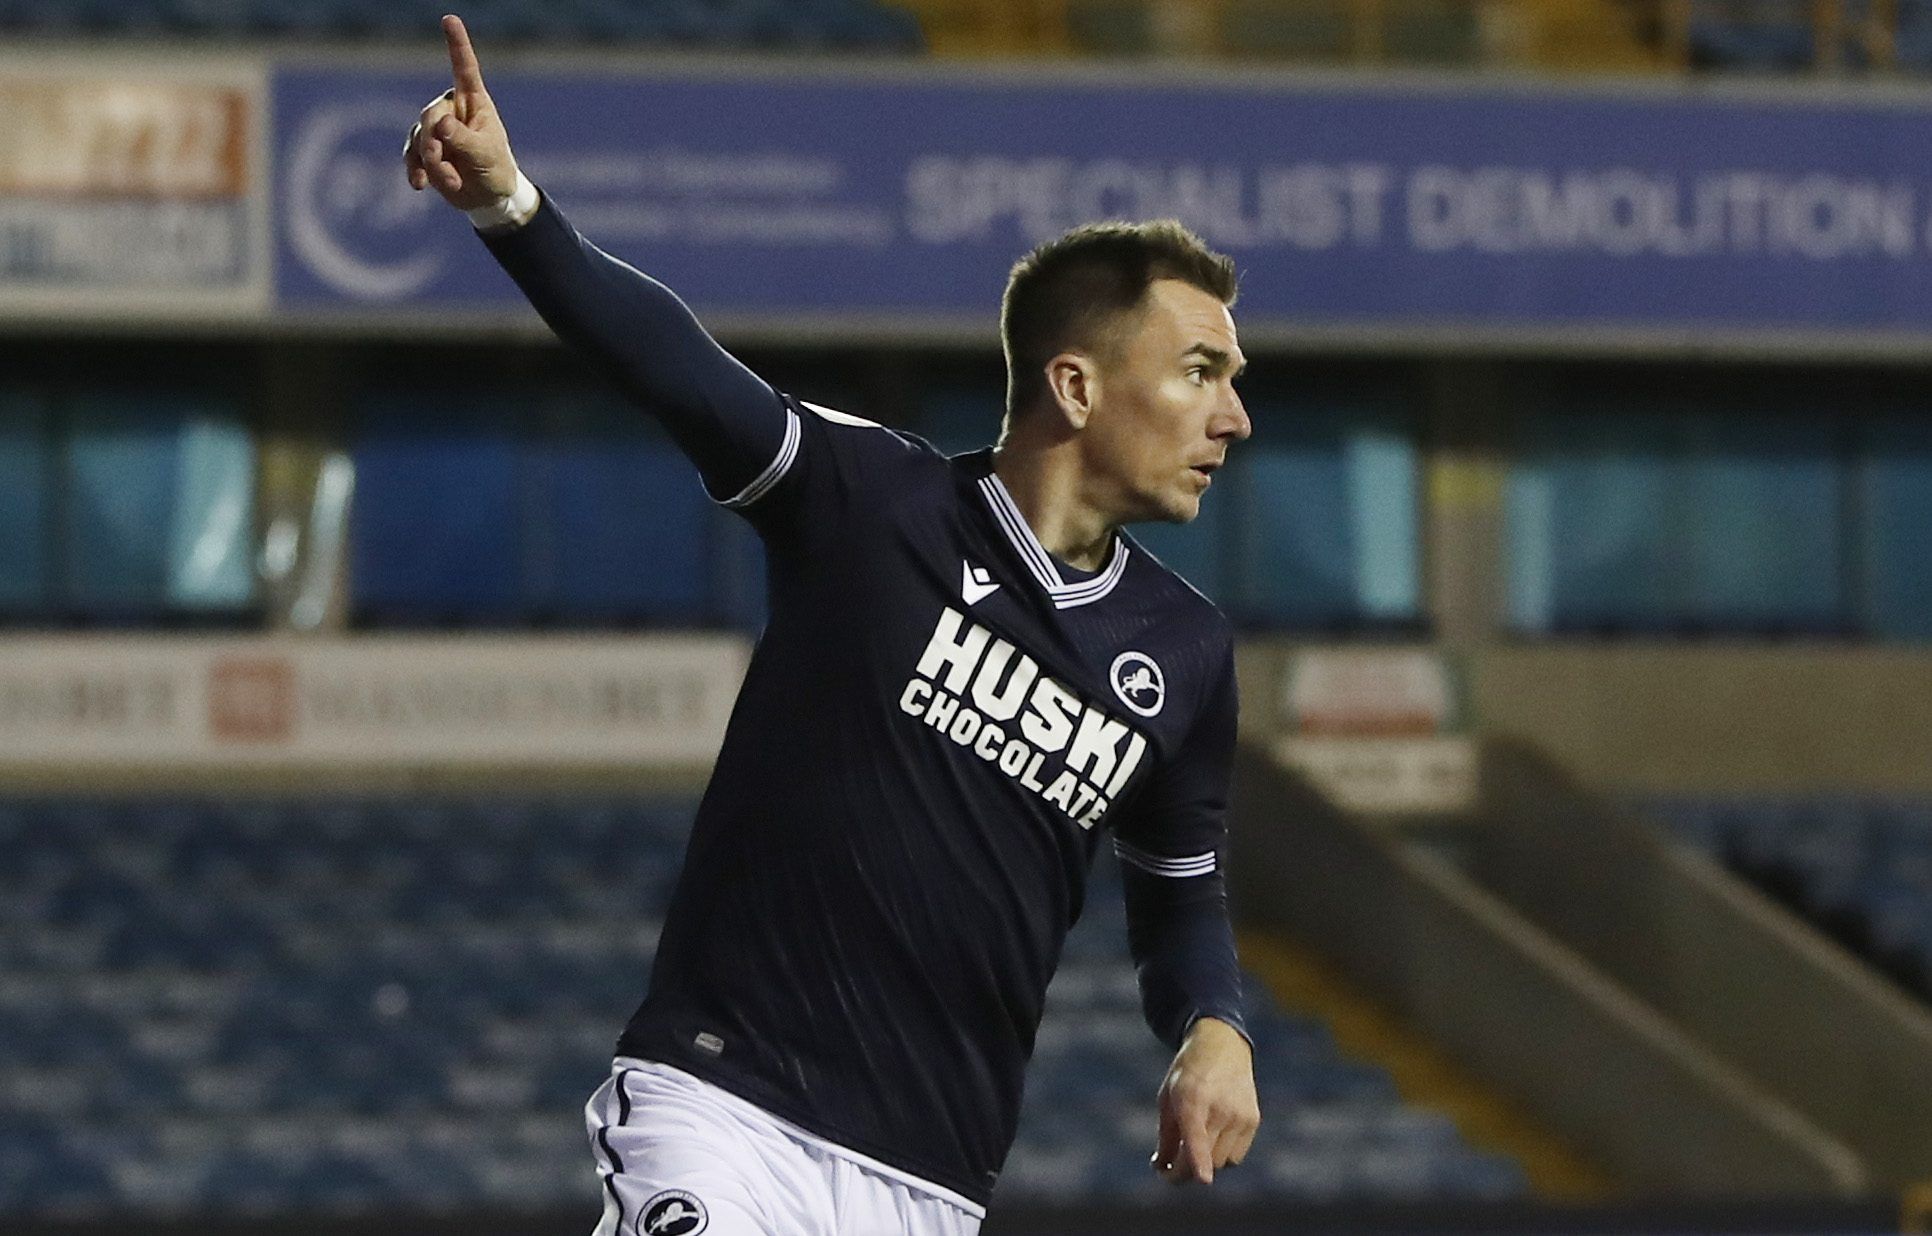 Soccer Football - Championship - Millwall v Birmingham City - The Den, London, Britain - February 17, 2021 Millwall's Jed Wallace celebrates scoring their first goal Action Images/Paul Childs EDITORIAL USE ONLY. No use with unauthorized audio, video, data, fixture lists, club/league logos or 'live' services. Online in-match use limited to 75 images, no video emulation. No use in betting, games or single club /league/player publications.  Please contact your account representative for further det